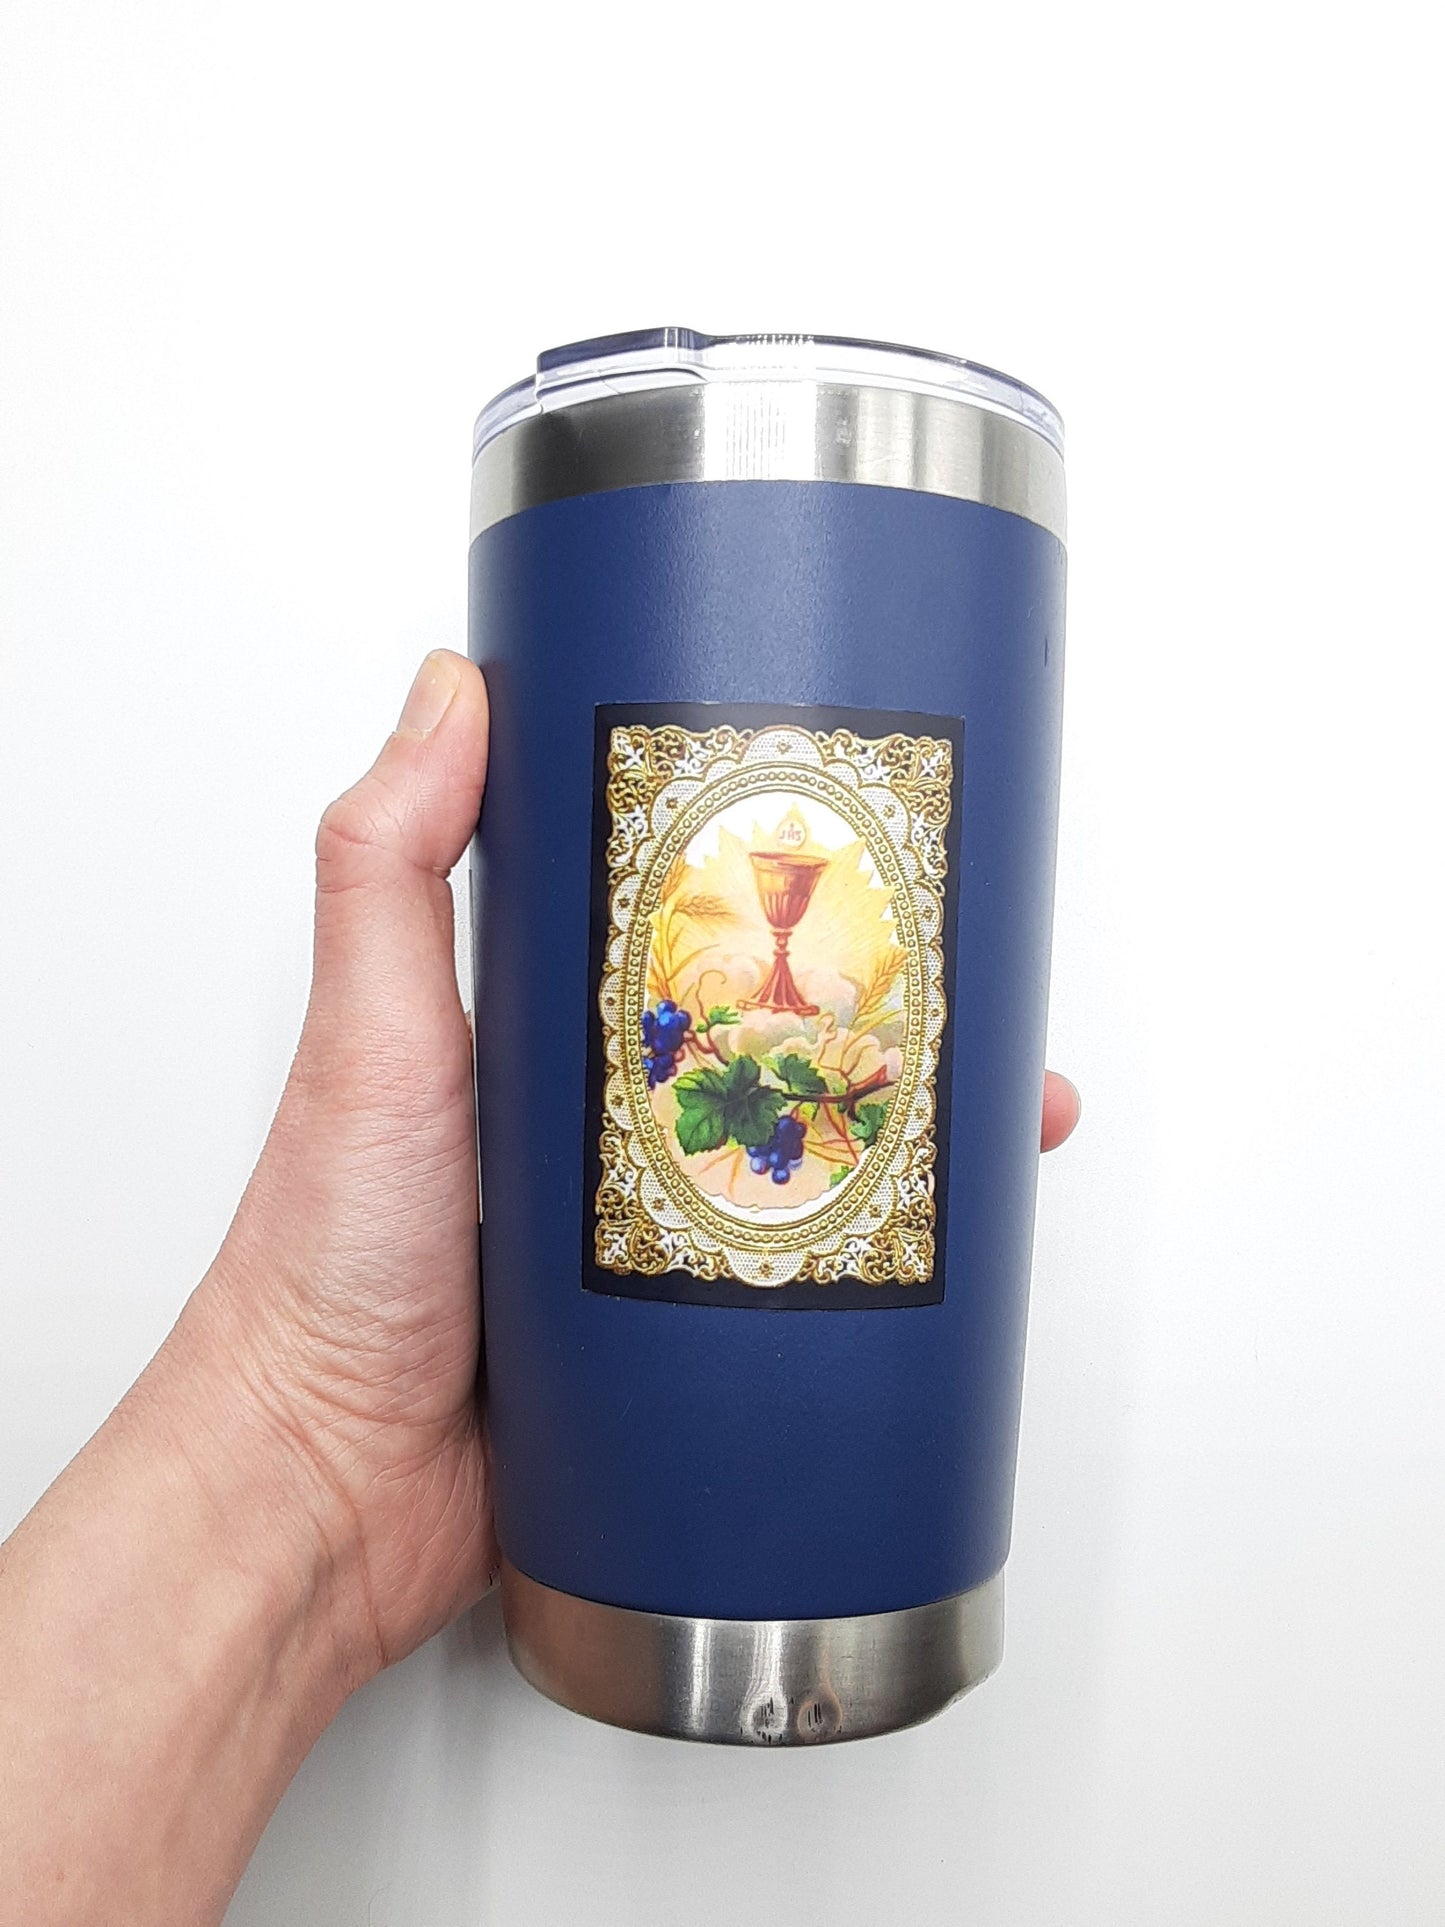 Holy Eucharist Sticker! – High Quality Vinyl – Wash Over and Over – Let Your Spirit Shine!